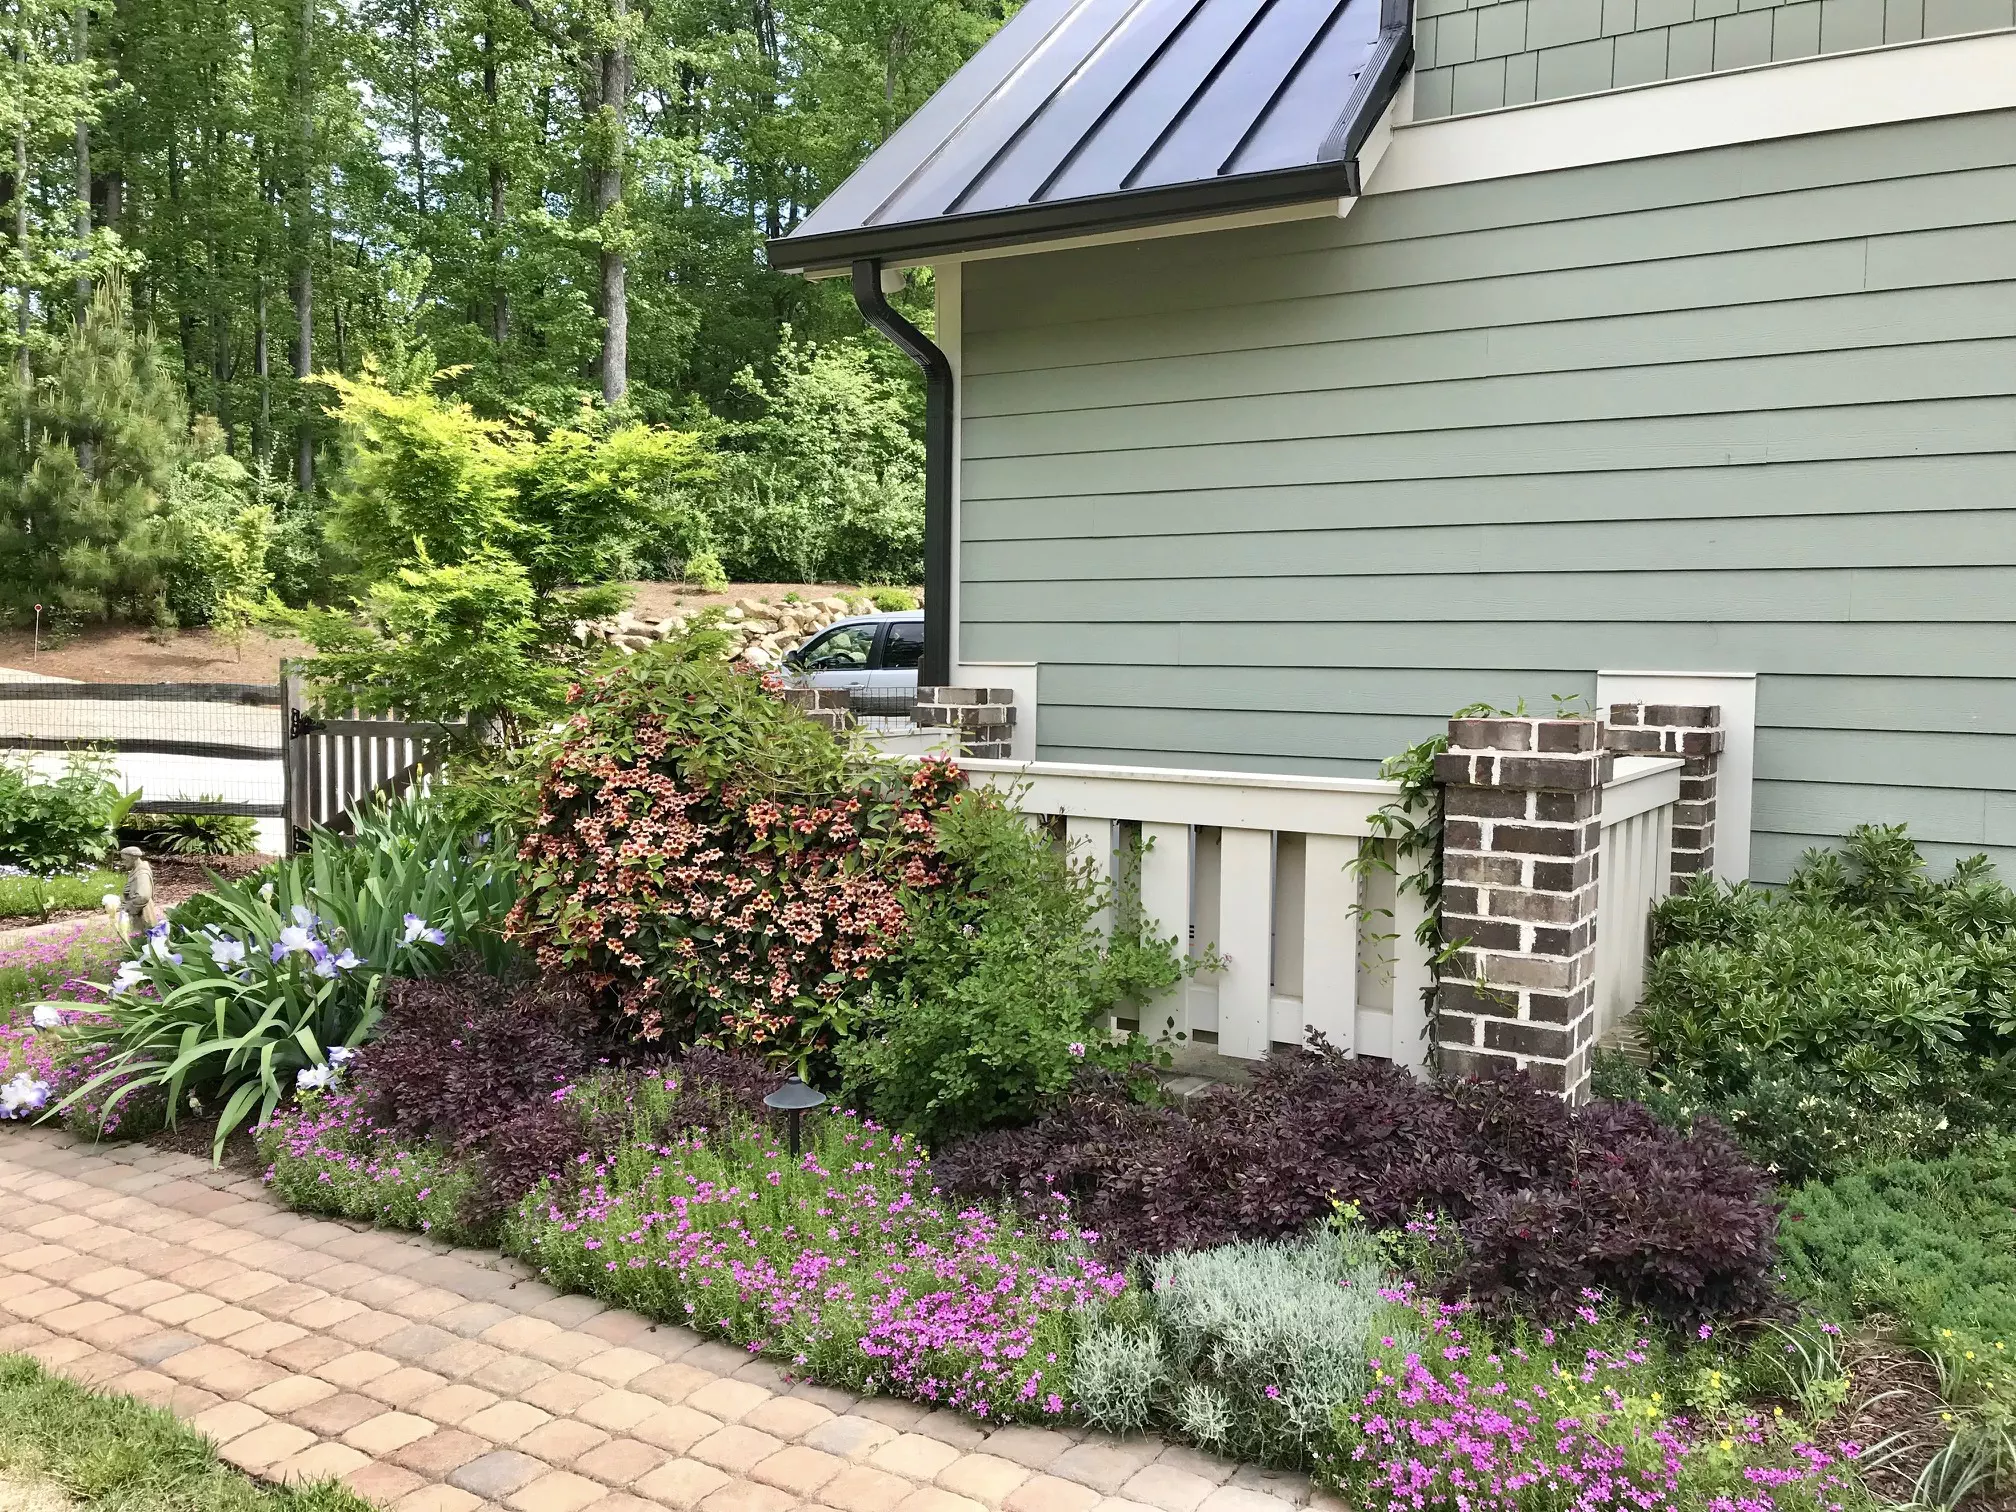 Landscaping Company Pittsboro NC, Landscaping Pittsboro NC, Landscape company Pittsboro NC, Landscape companies Pittsboro NC, Landscape designer Pittsboro NC